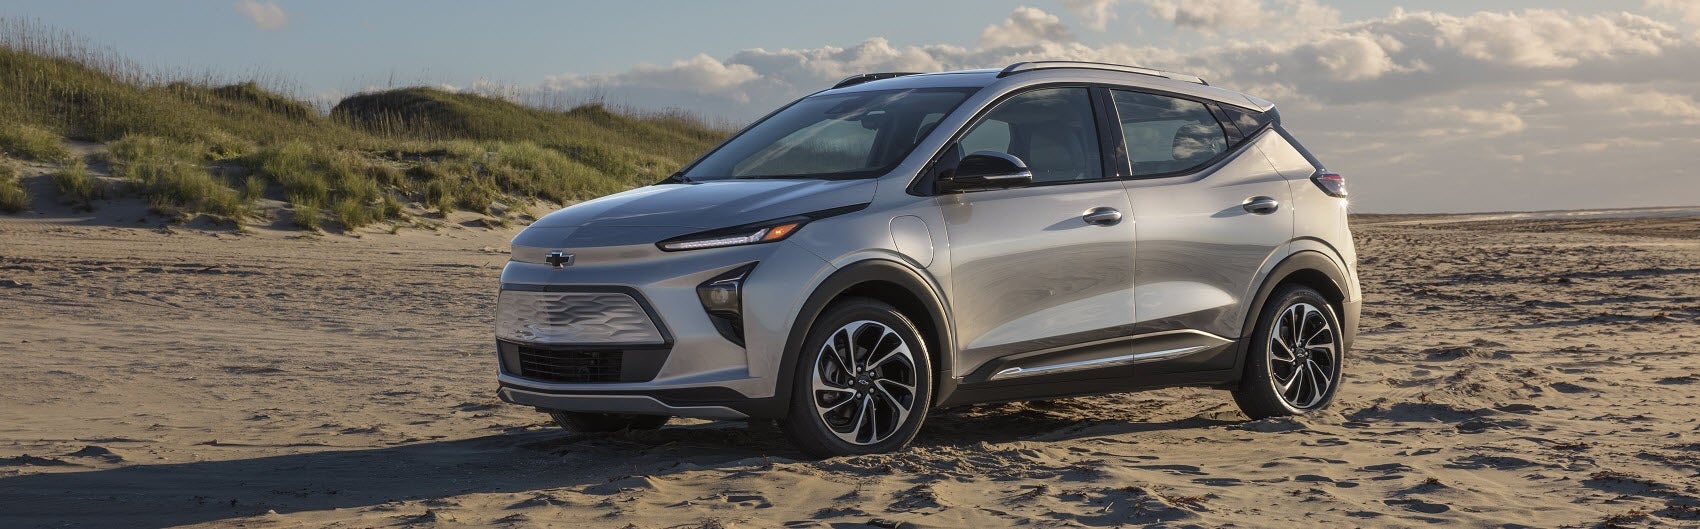 2021 silver Chevy Bolt parked on beach